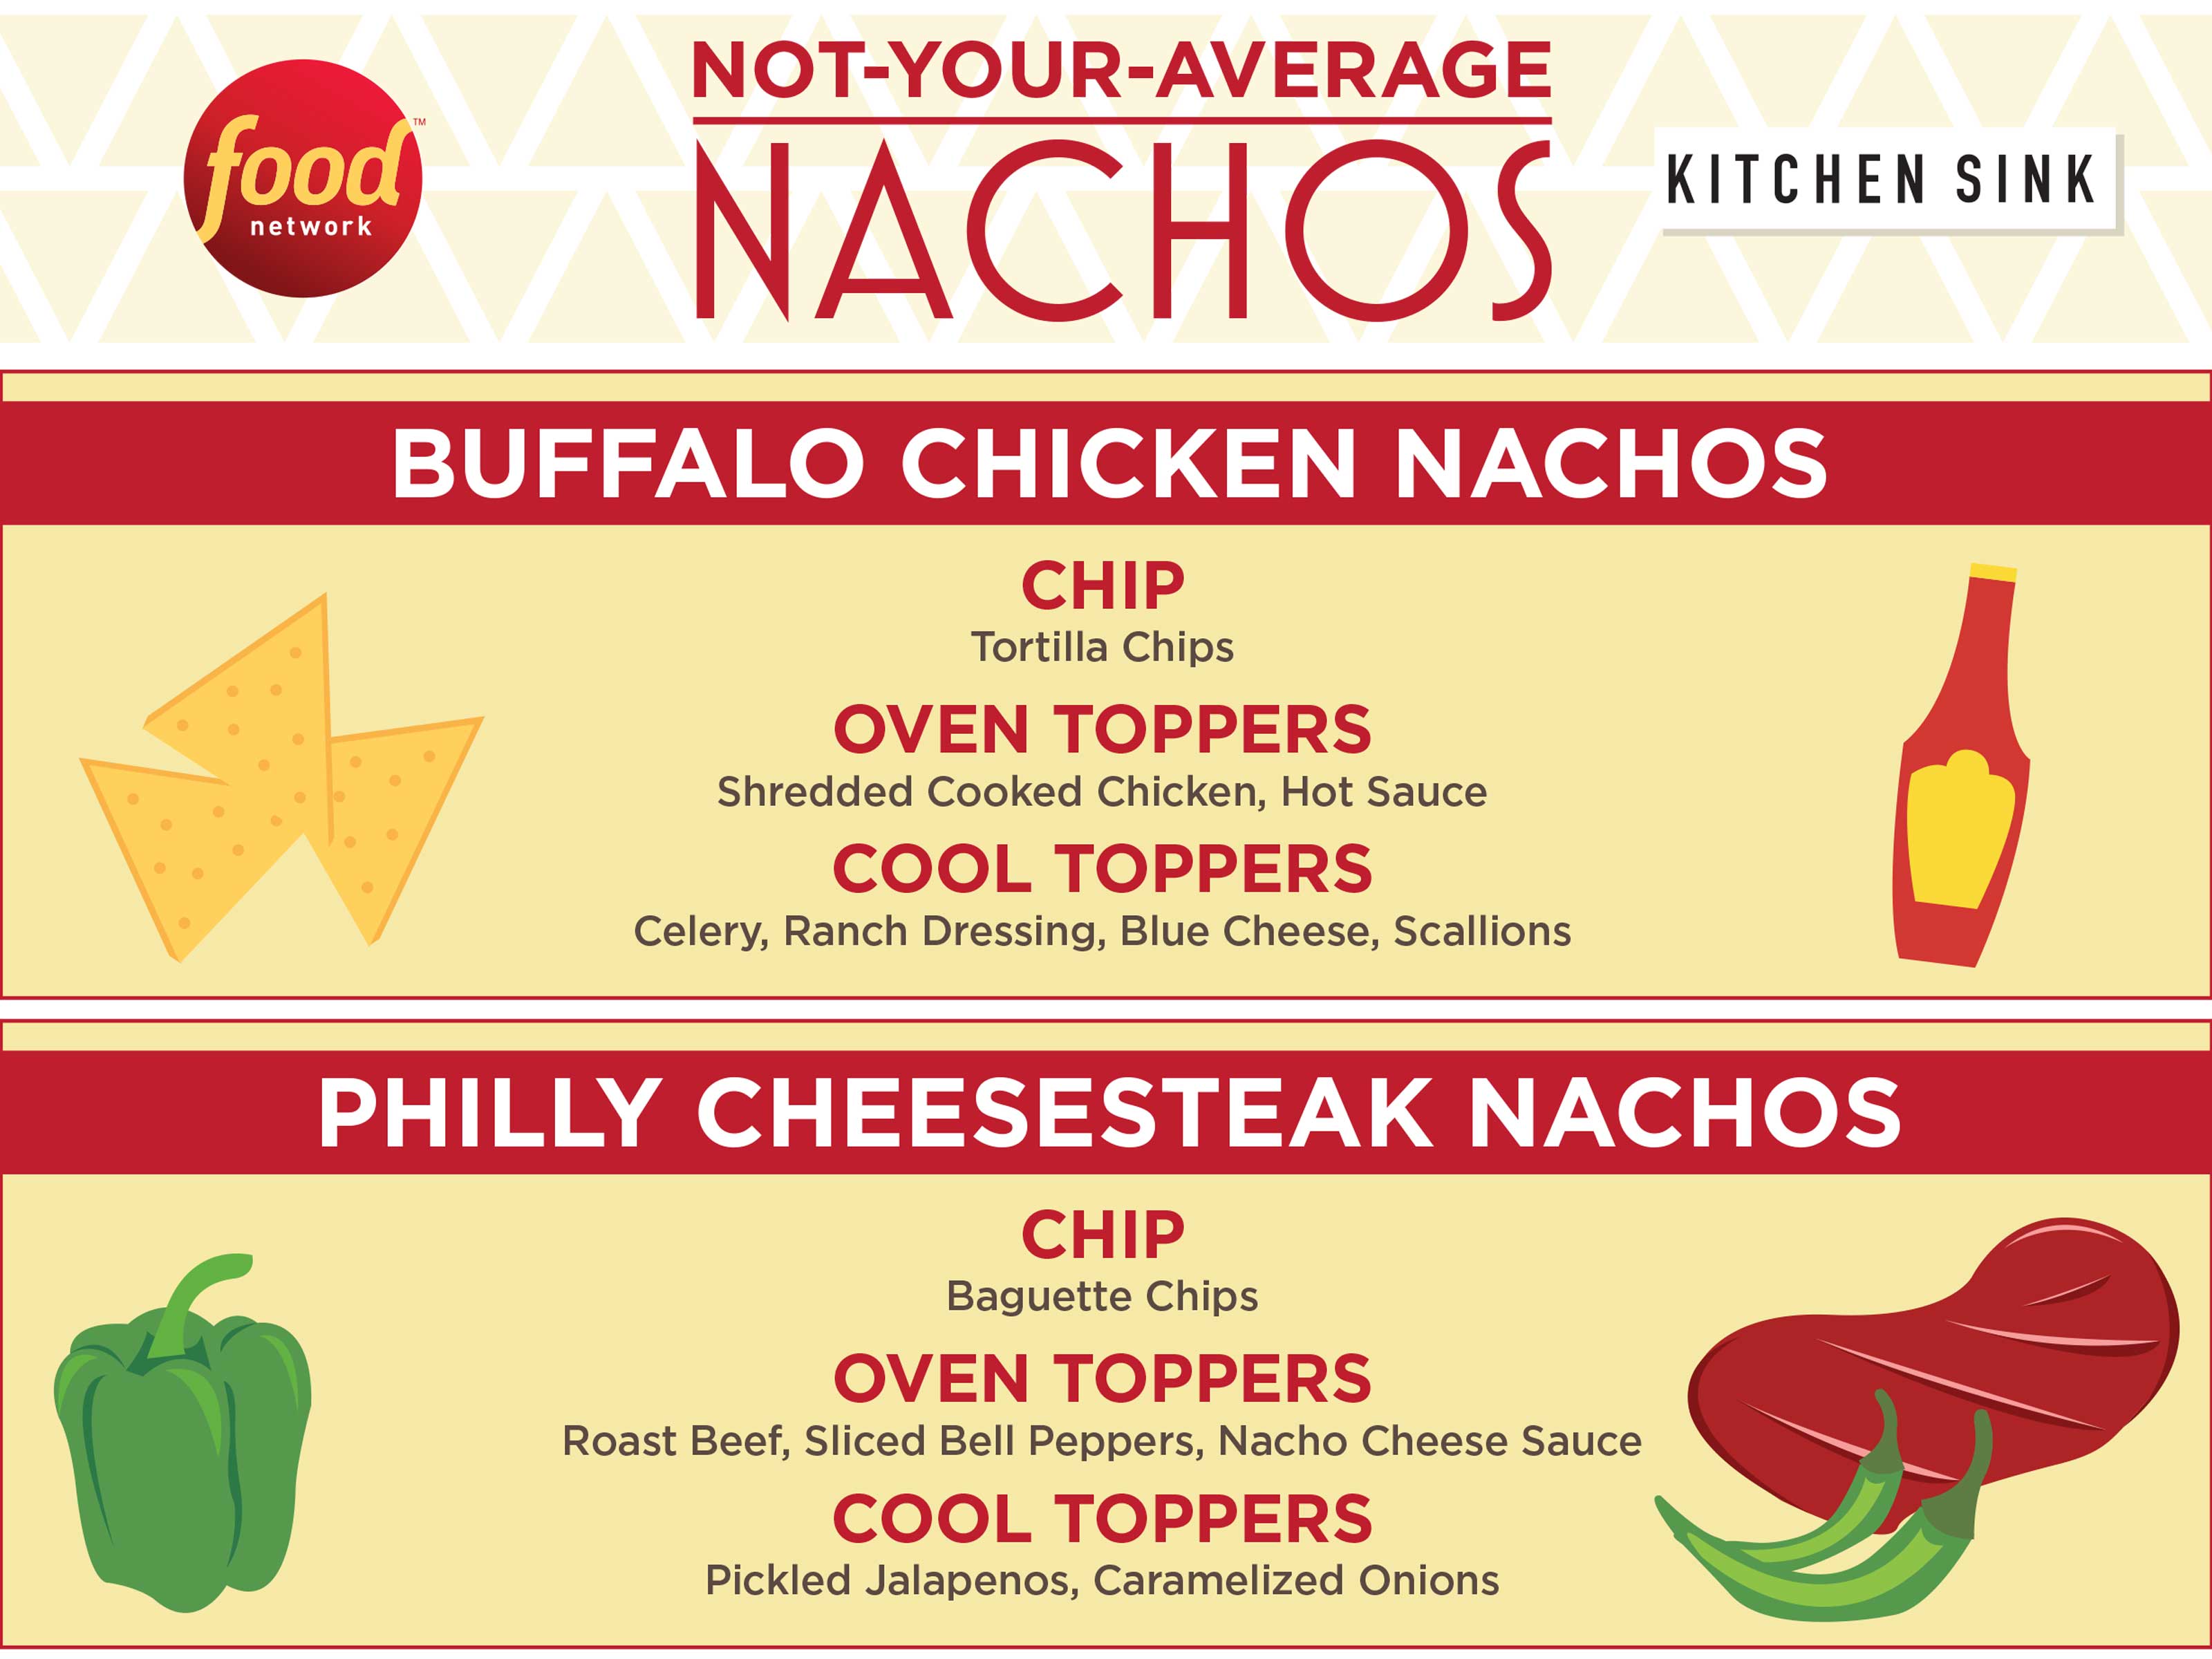 Upgrade your nacho game with these go-to ideas for chips and toppings.